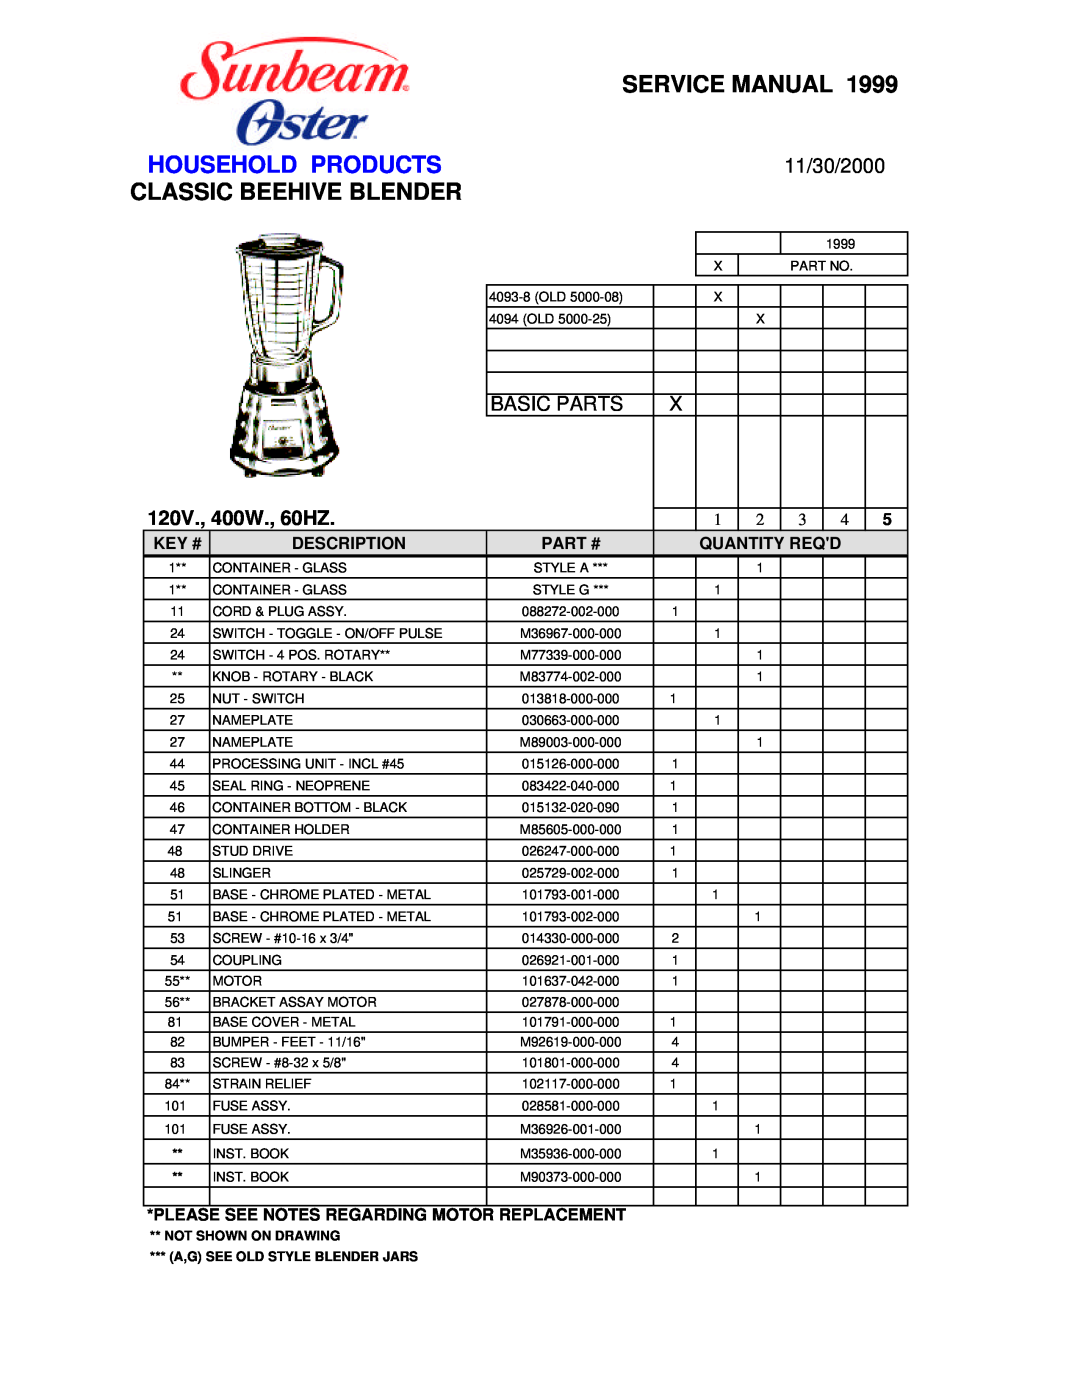 Sunbeam M98111-000-000 service manual 11/30/2000, Basic Parts, Service Manual, Household Products, Classic Beehive Blender 